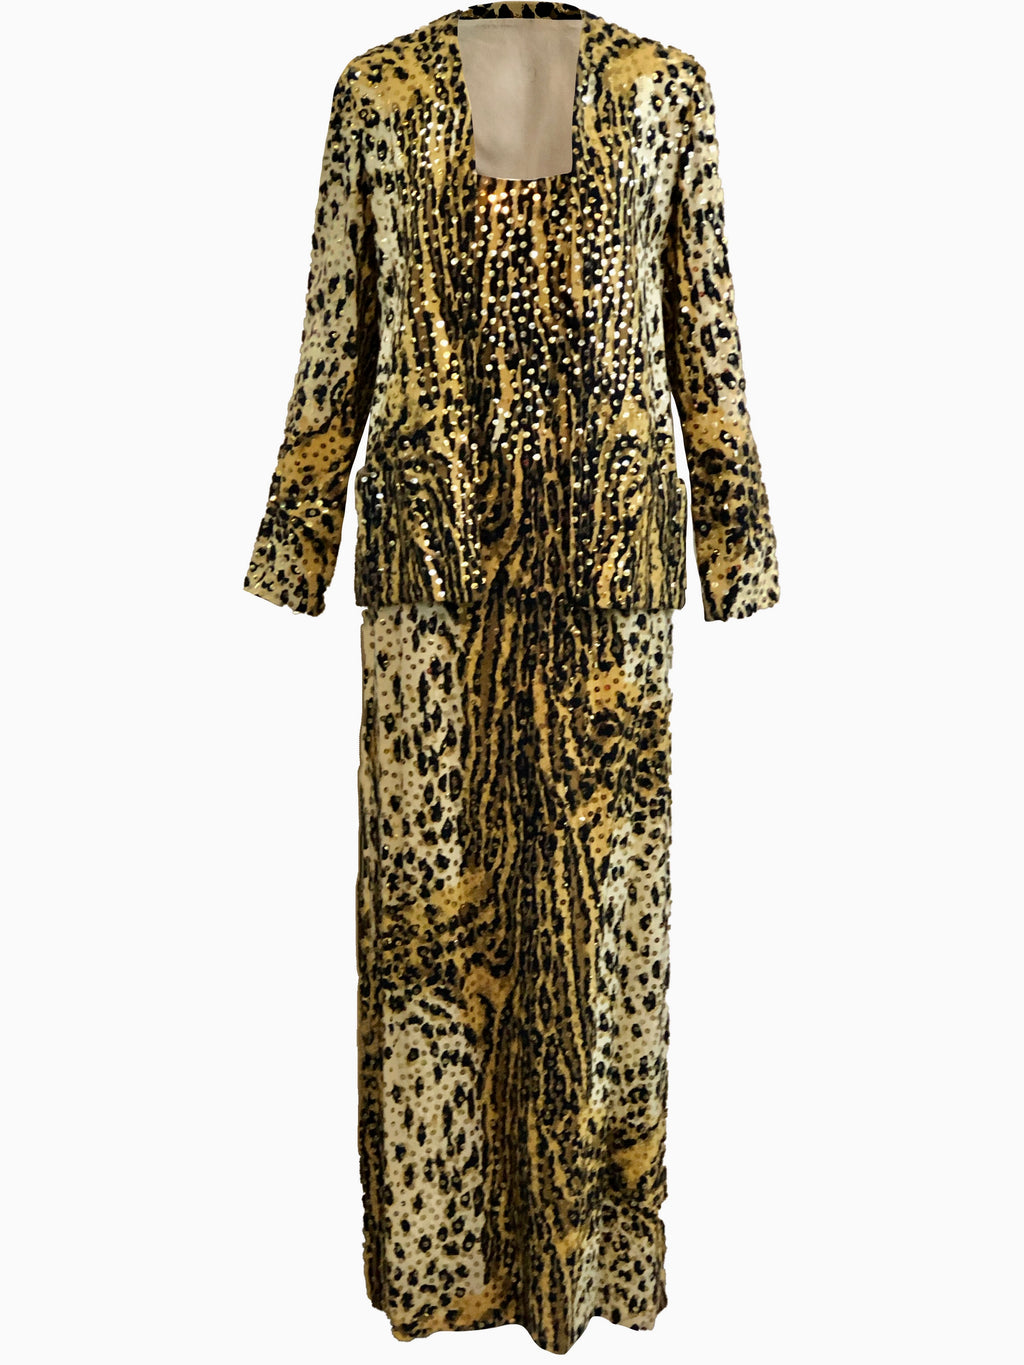  Mollie Parnis 70s Leopard Print Gown with Sequins and Matching Jacket FRONT ENSEMBLE 1 of 7